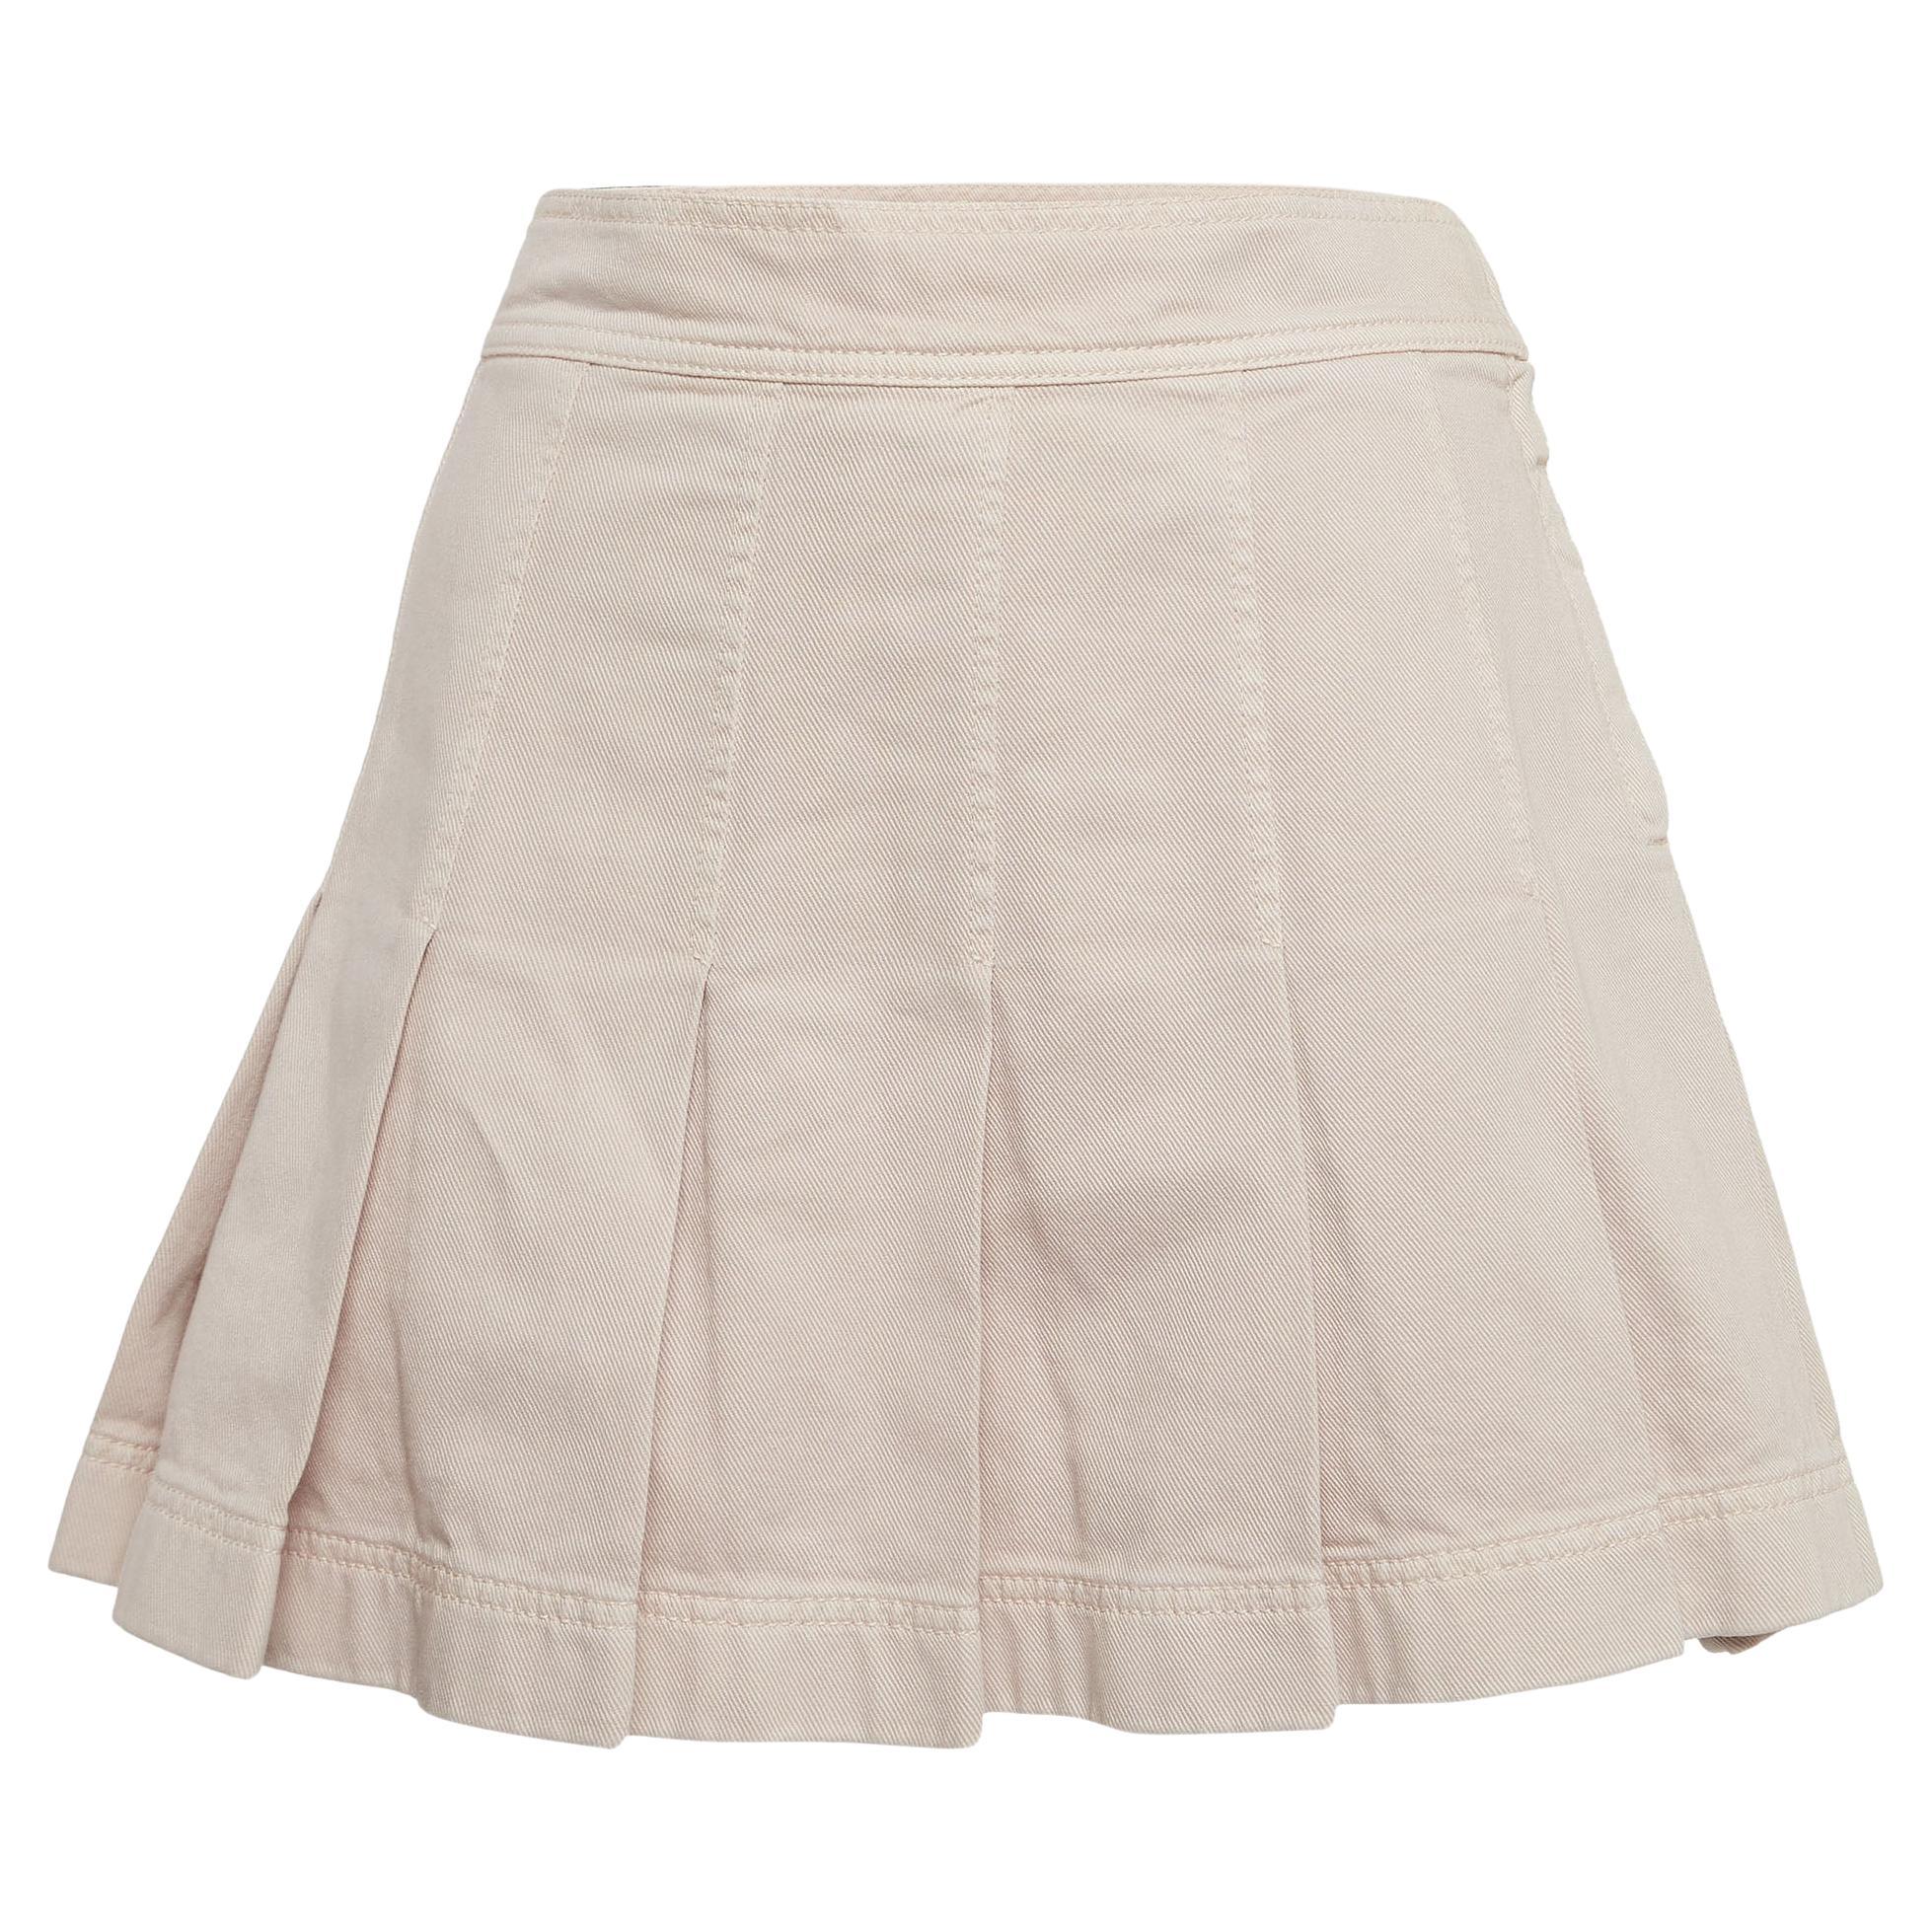 This lovely skirt is beautifully stitched from fine fabric. The comfy designer skirt has a flattering silhouette. Pair it with a simple top and strappy heels for a chic look.

Includes: Brand Tag